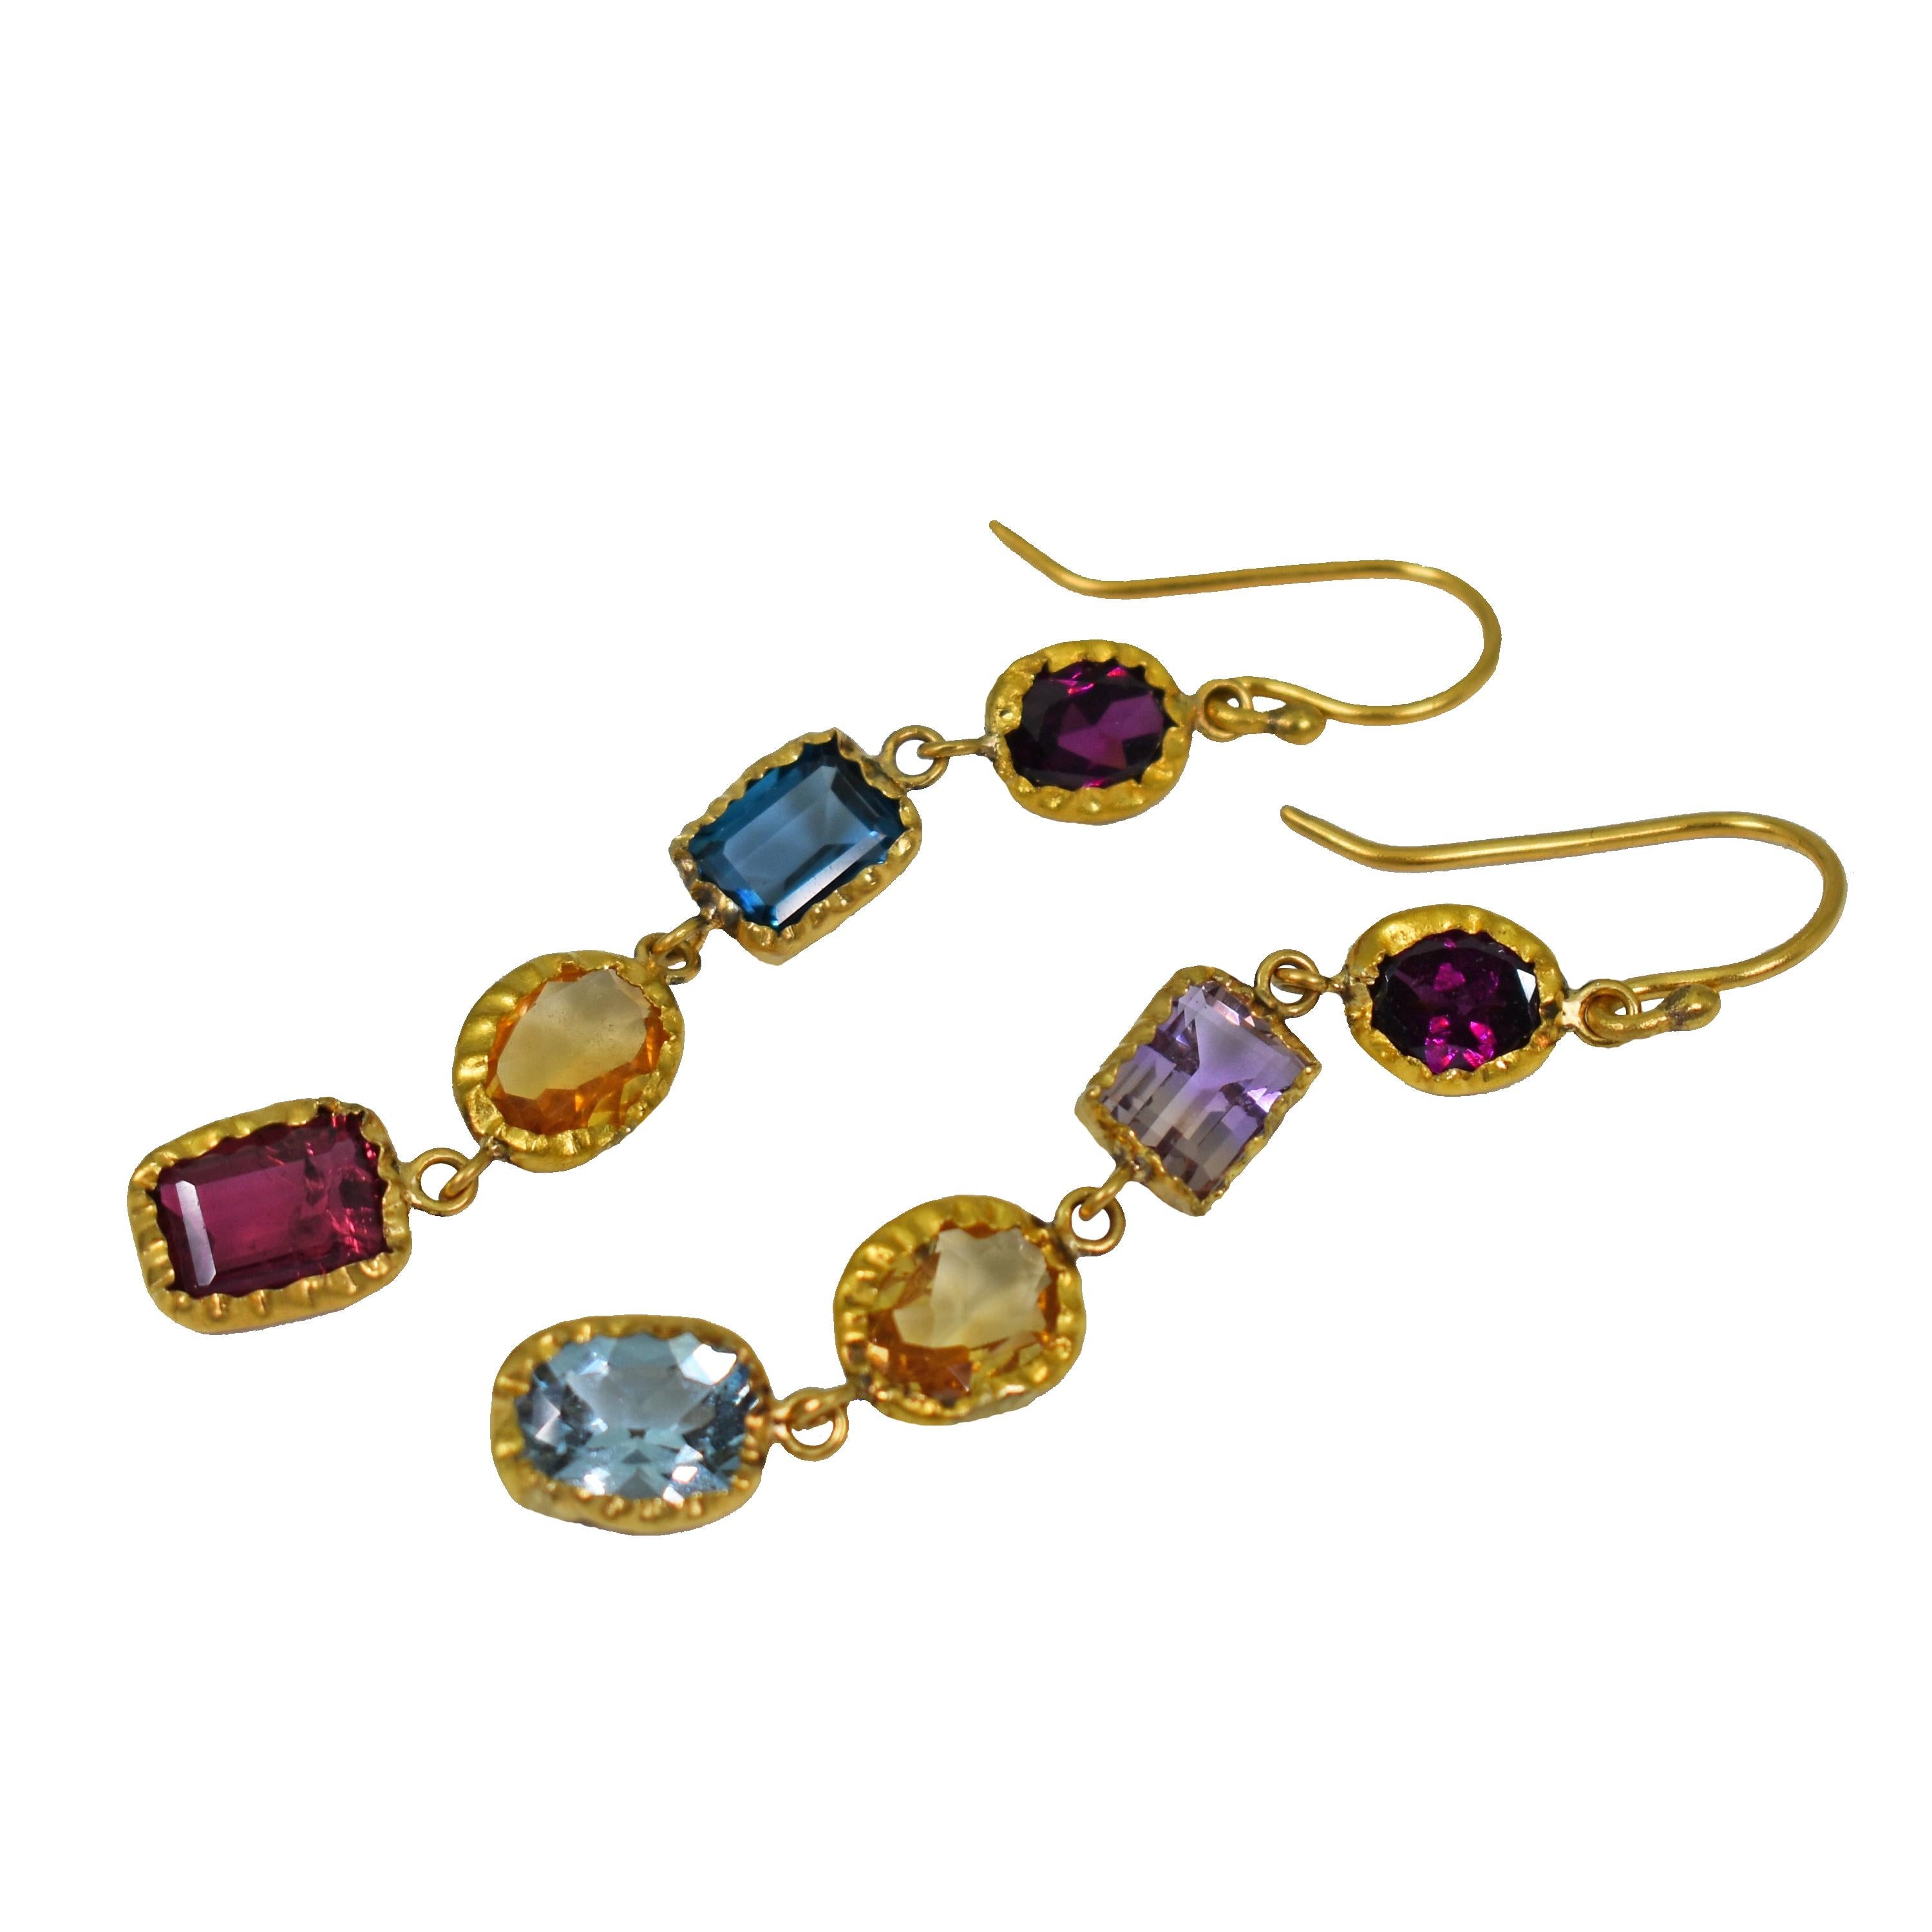 Colorful, multi-gemstone asymmetrical dangle earrings wrapped in 22k yellow gold. Gemstones include Rhodolite Garnet, Ametrine, Blue Topaz, Citrine, Aquamarine and Pink Tourmaline. Dangle earrings are 2.5 inches in length and come with silicone